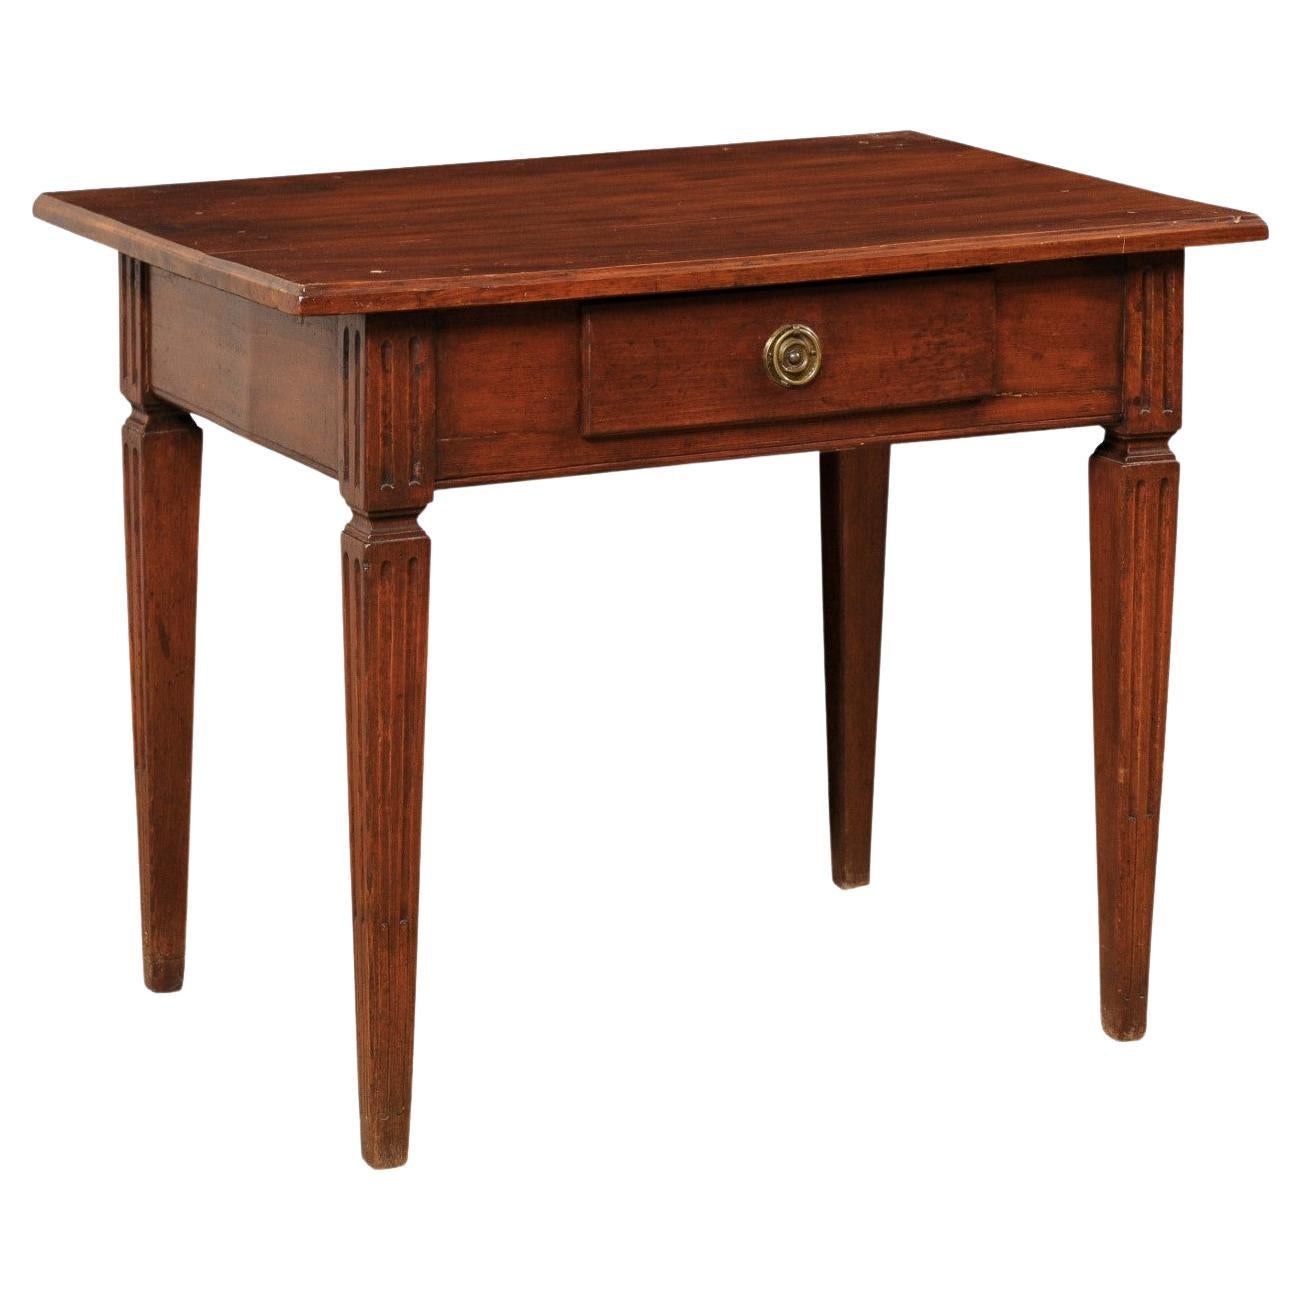 Italian Small Wooden Table w/Drawer Presented on Flute-Carved Legs, 19th C. For Sale